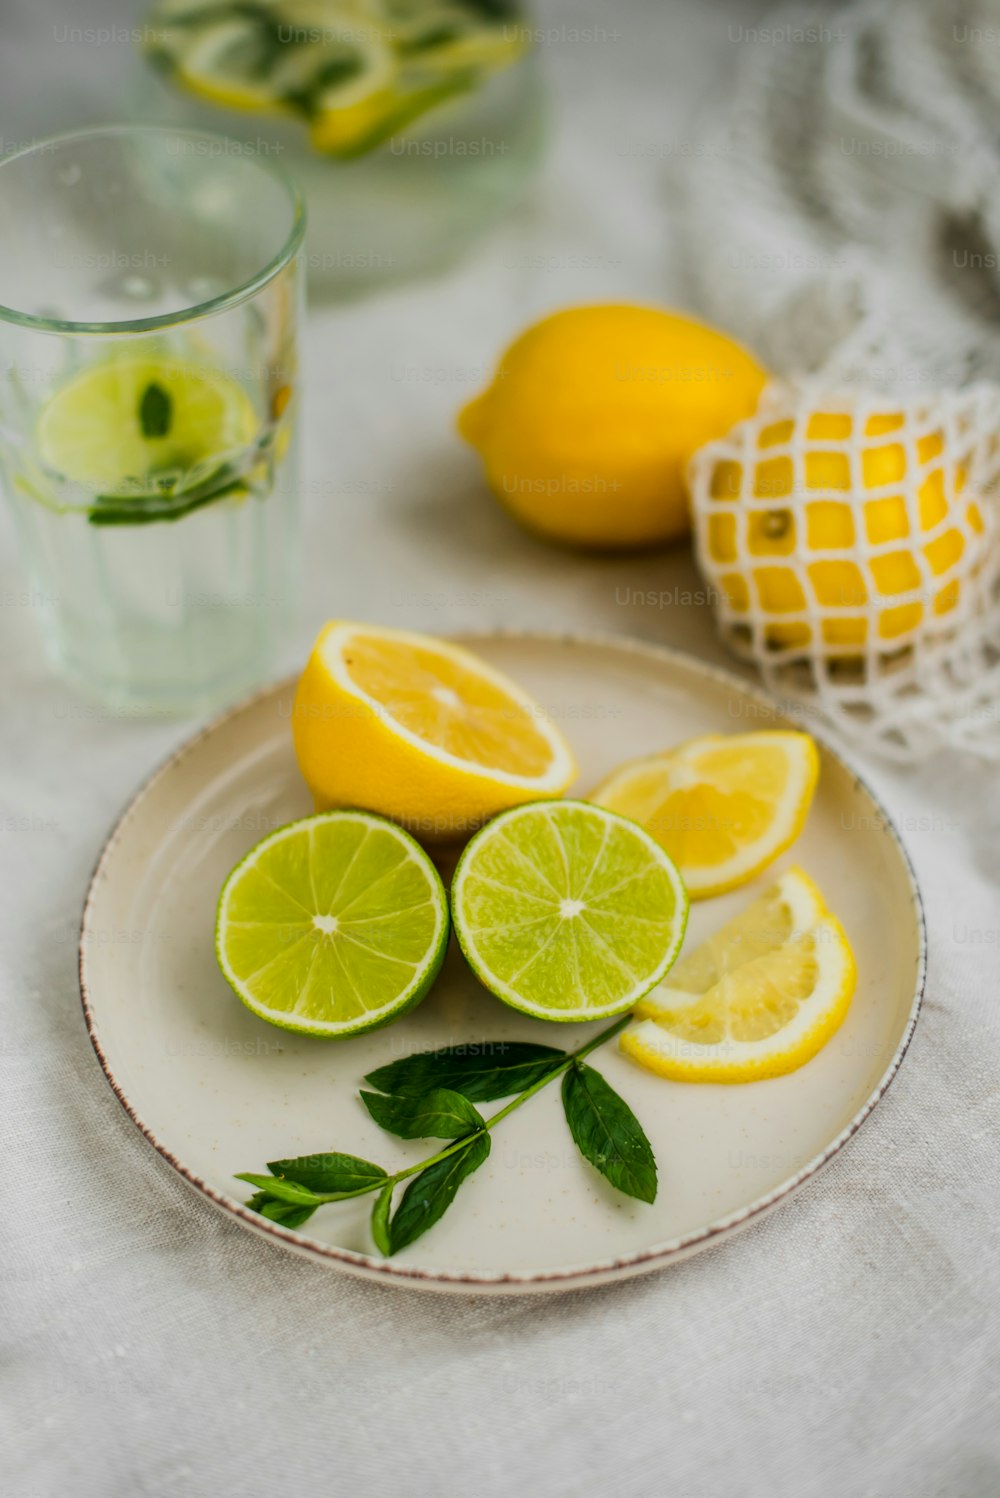 a plate of lemons and limes on a table